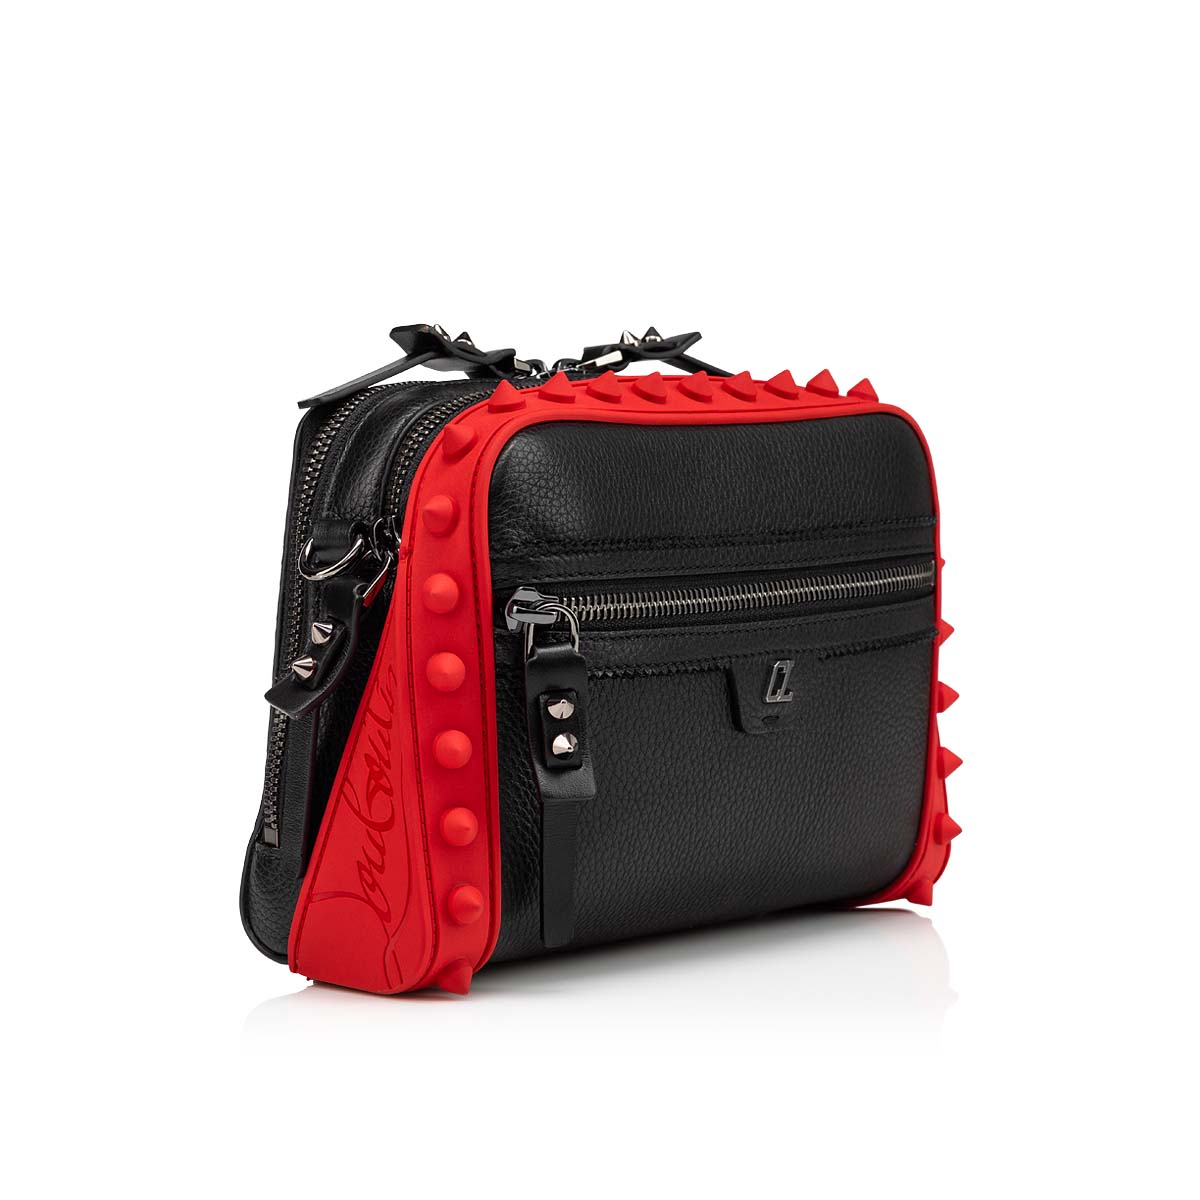 Loubitown Leather Bag in Red - Christian Louboutin